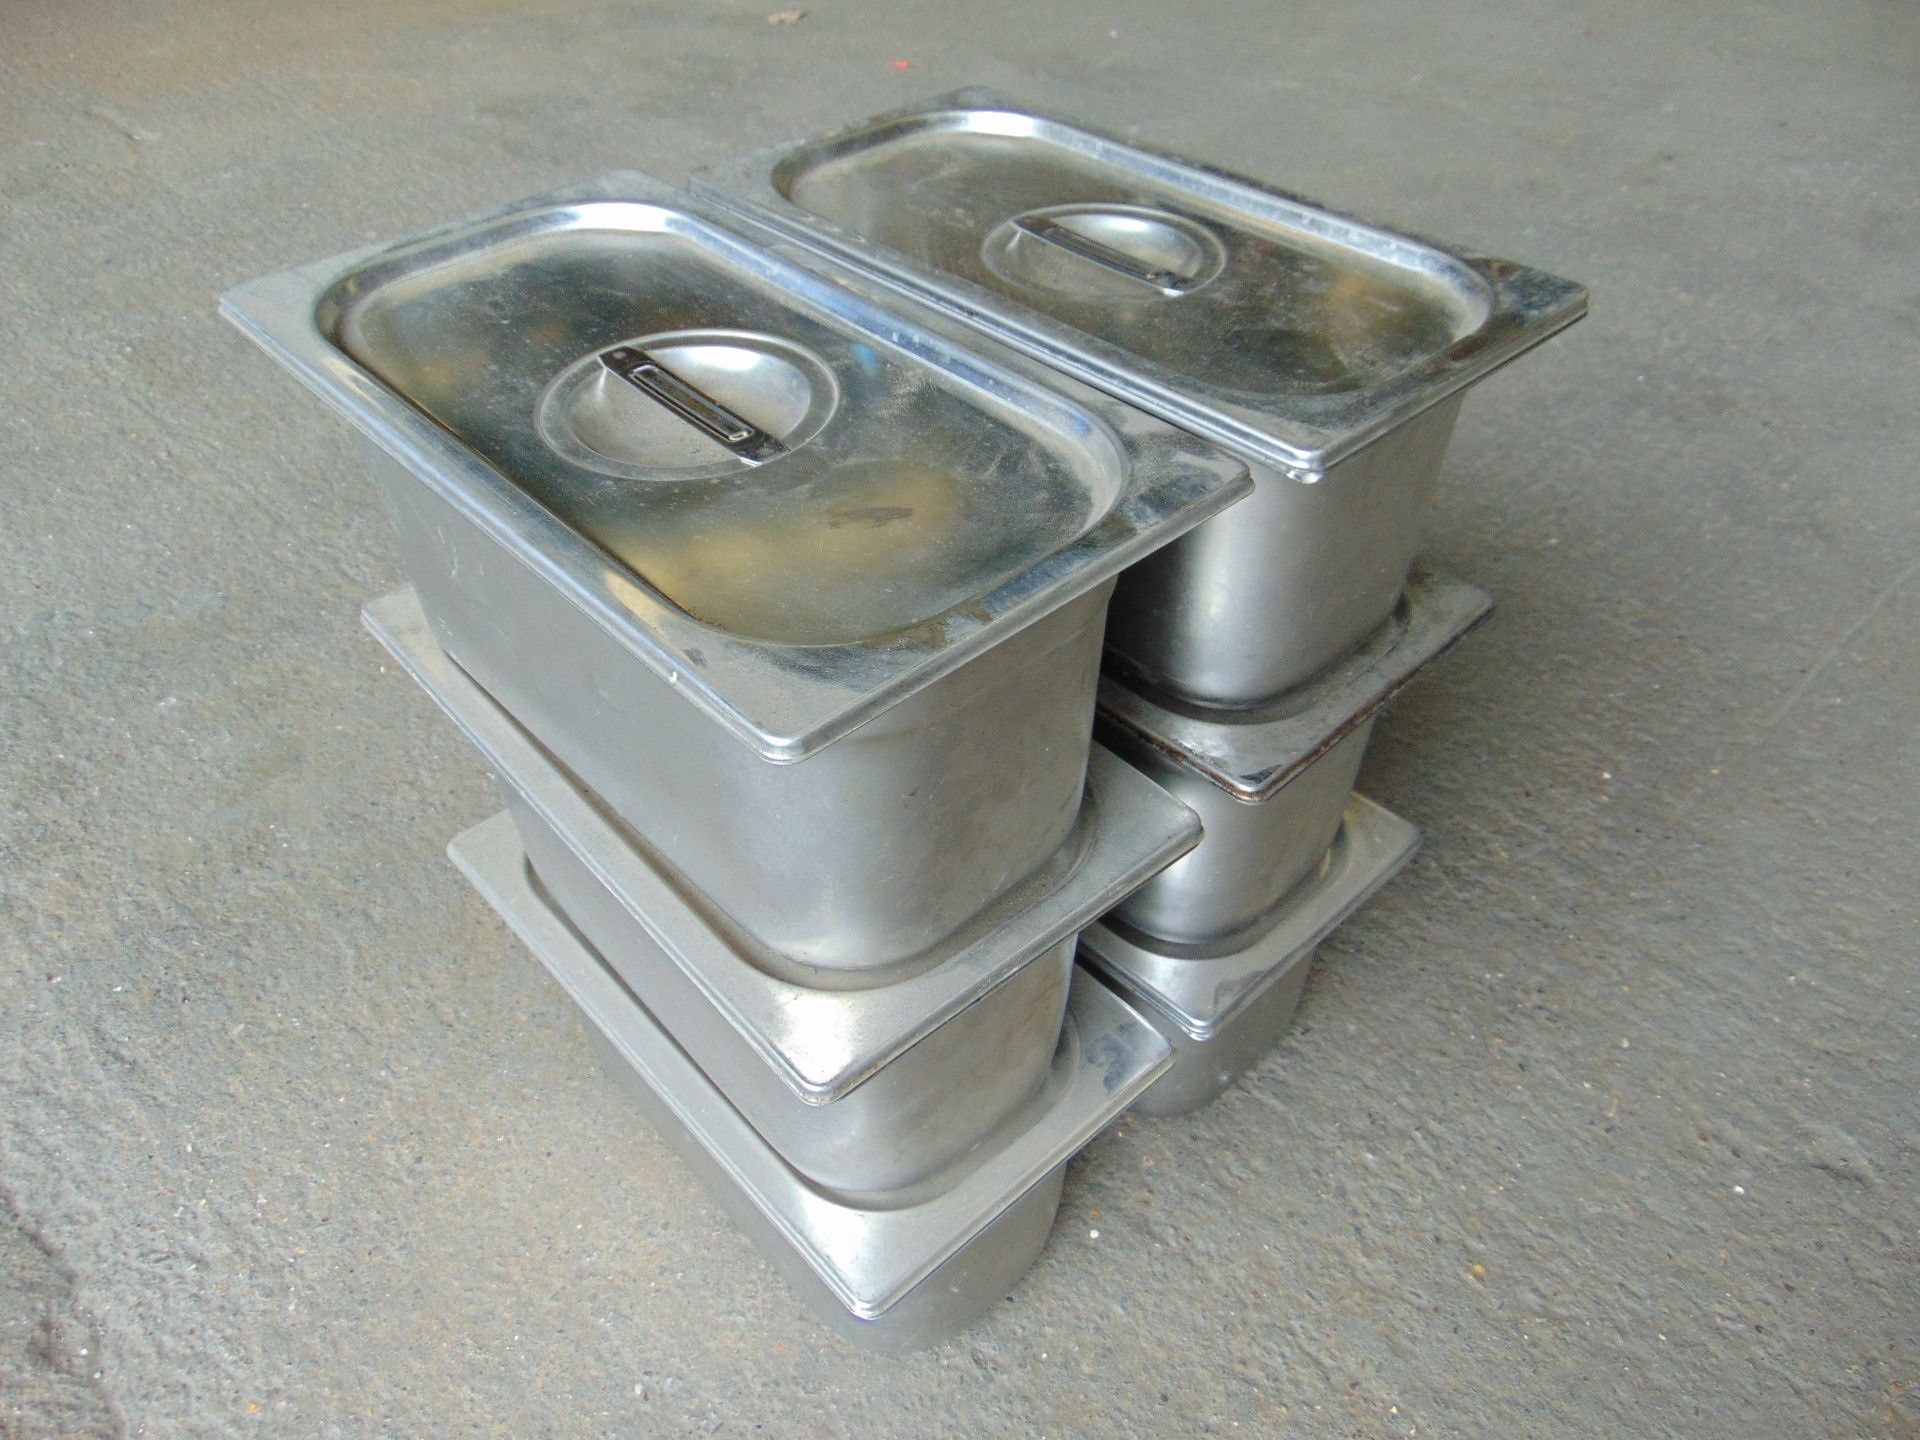 6 x Stainless Steel British Army Bourgeat Gastronorm Pans as shown